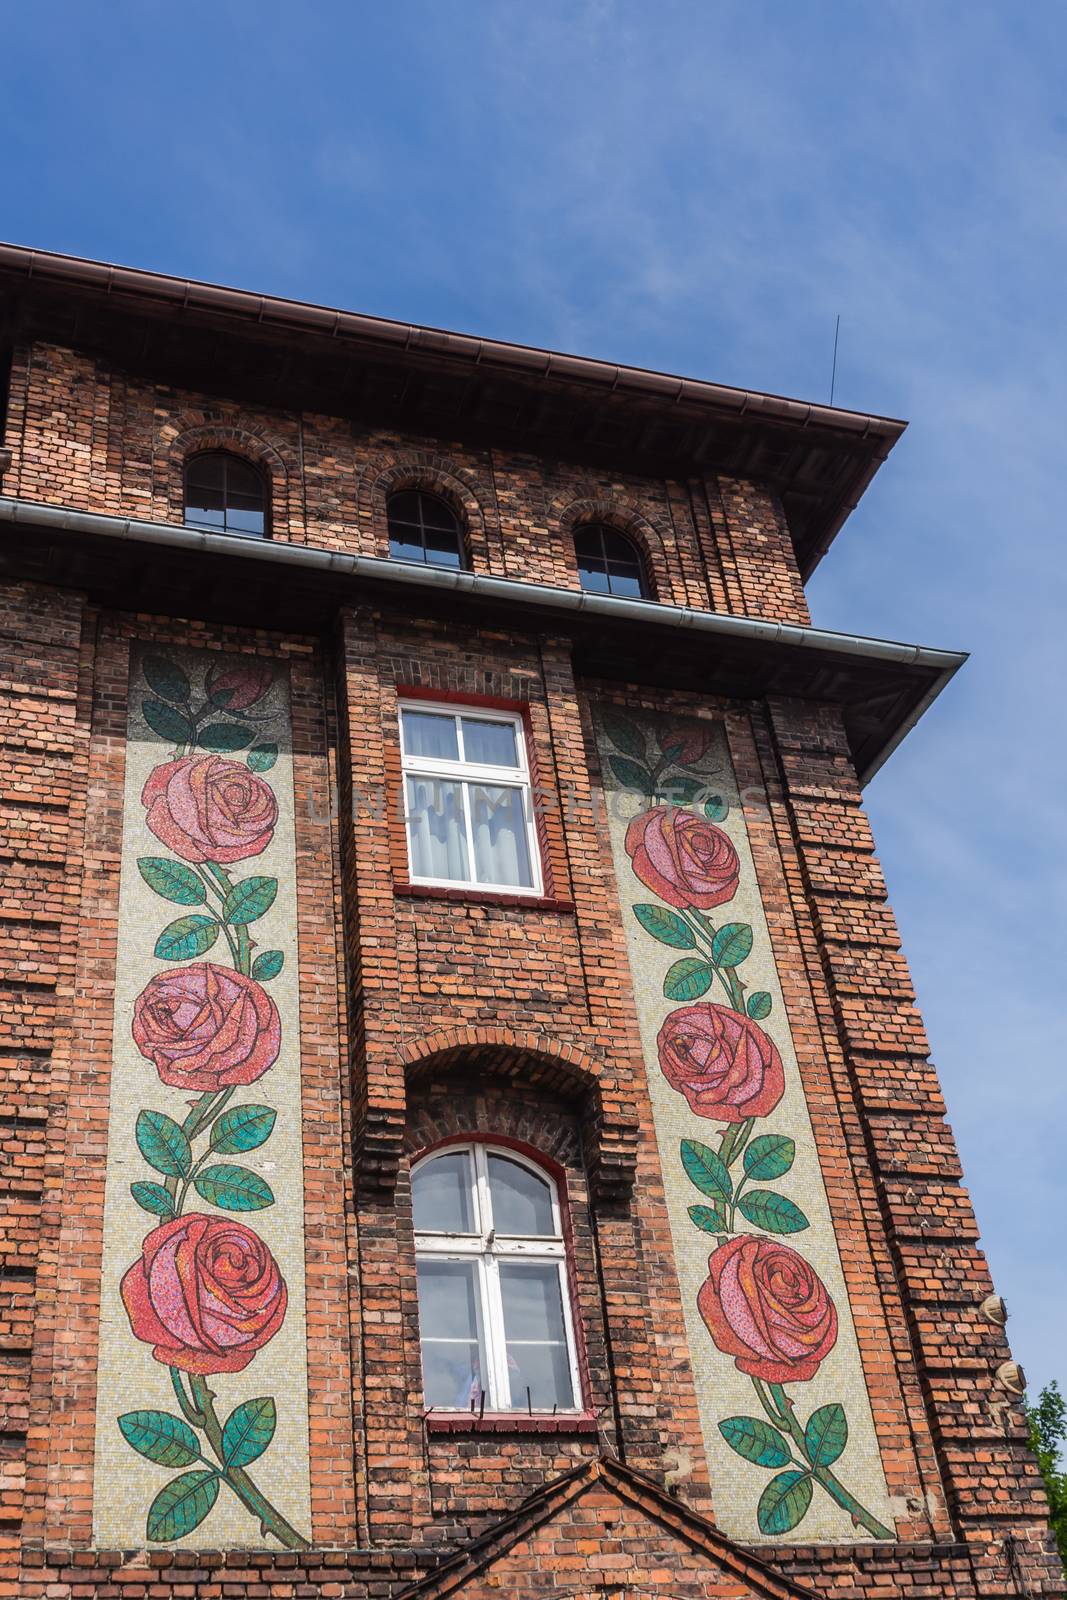 Mosaic on the facade of the Post Office in Nikiszowiec, district of Katowice. The place is unique historic coal miners' settlement, built between 1908 -1918.